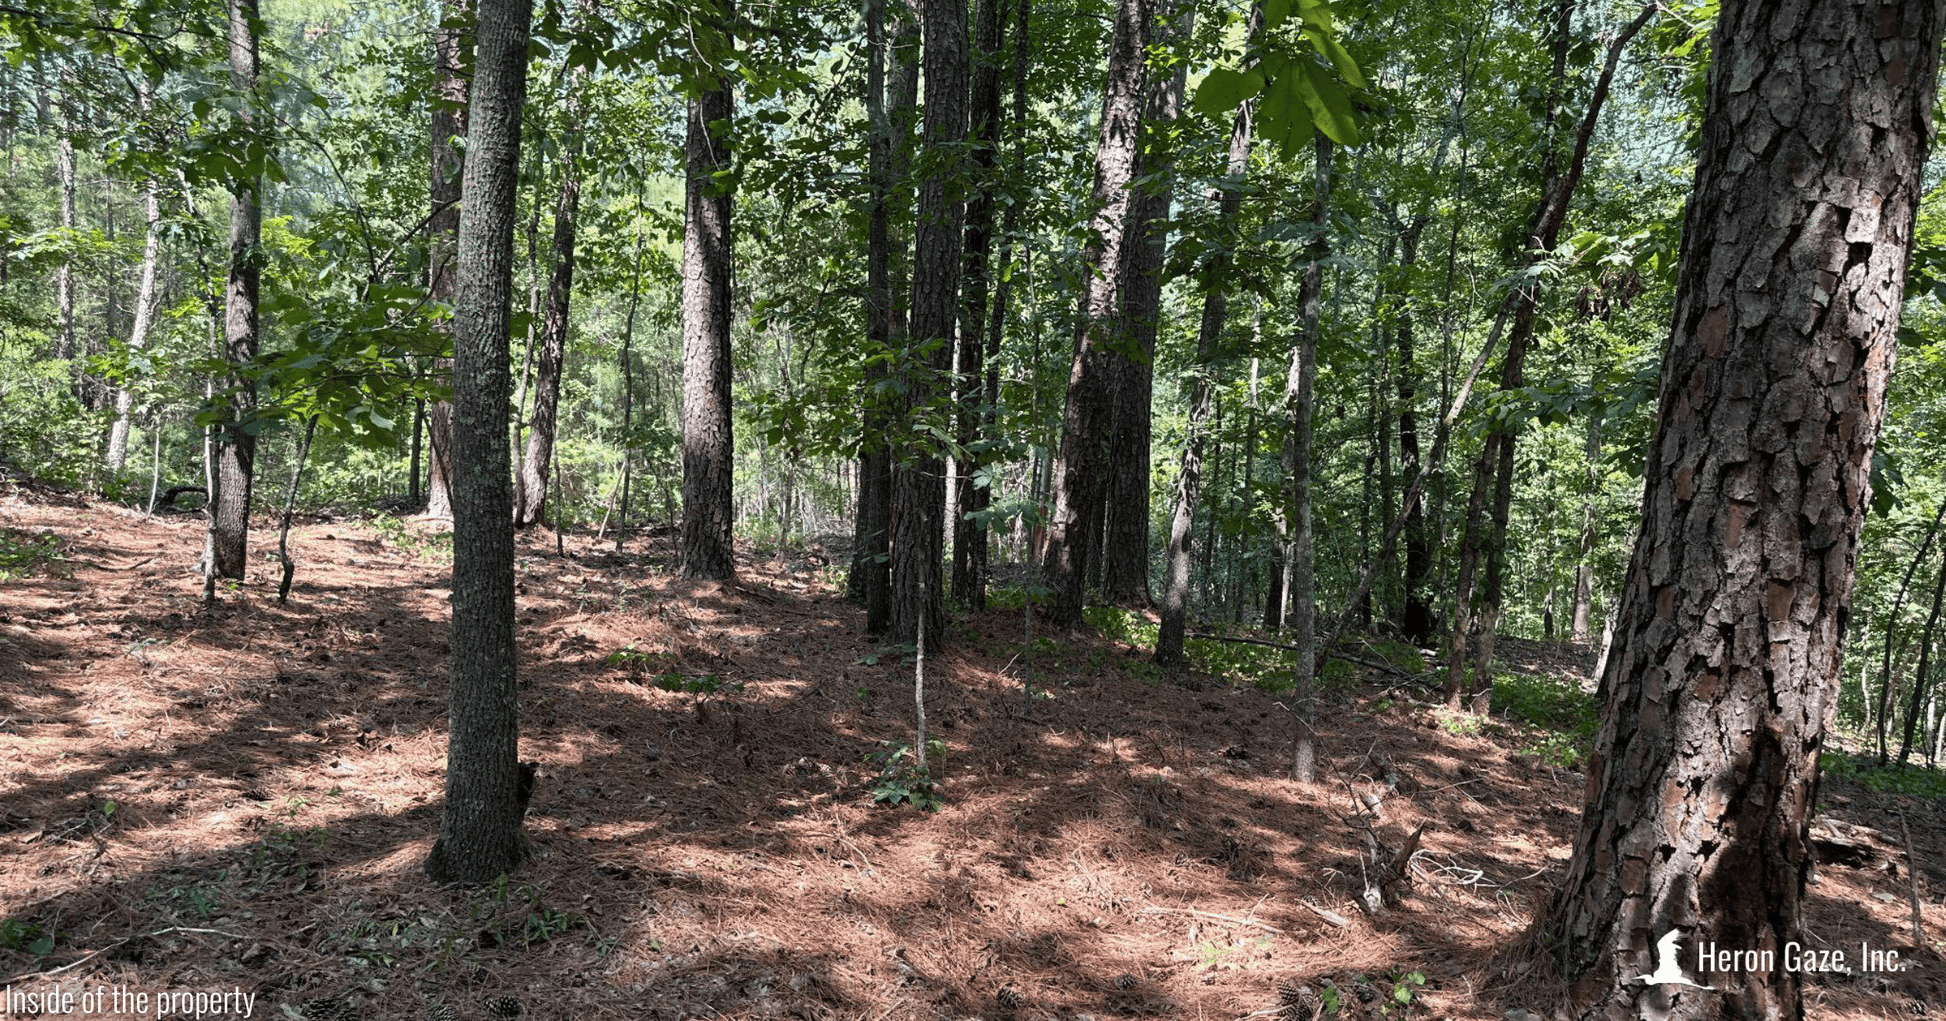 Inside of the Property